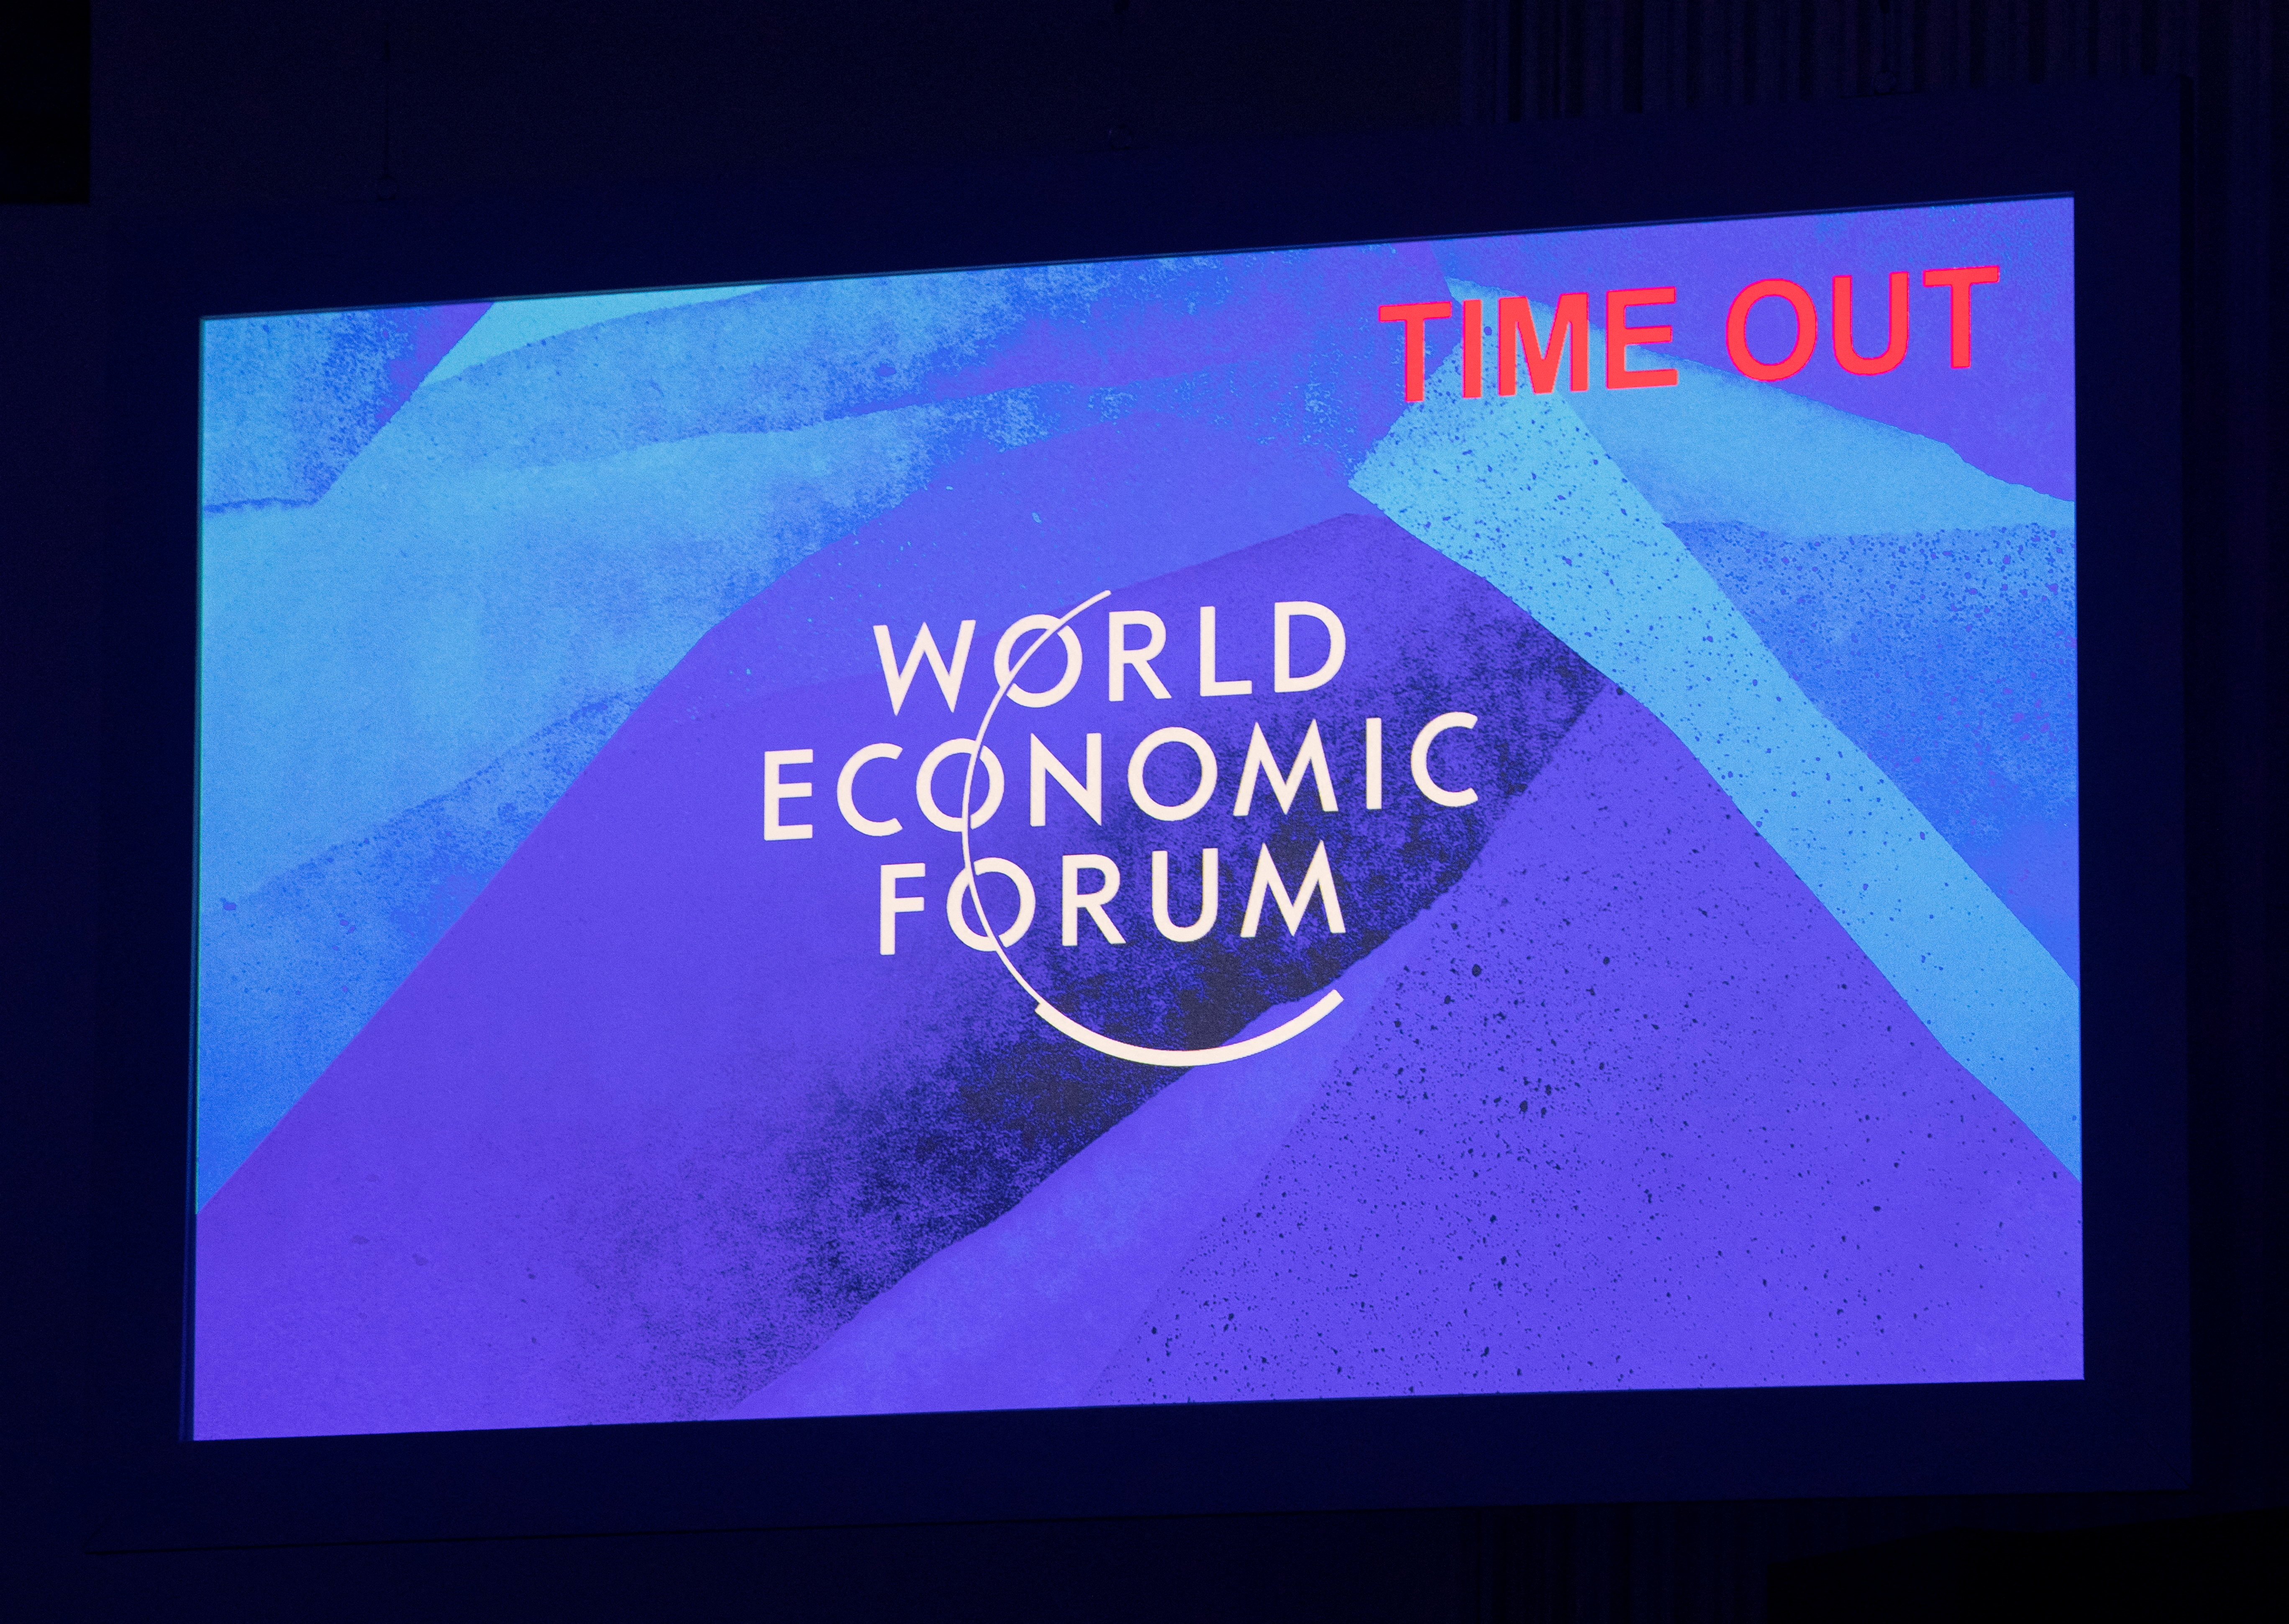 A "Time out" announces the end of a panel discussion on a screen at the World Economic Forum 2022 (WEF) in the Alpine resort of Davos, Switzerland May 23, 2022.  REUTERS/Arnd Wiegmann